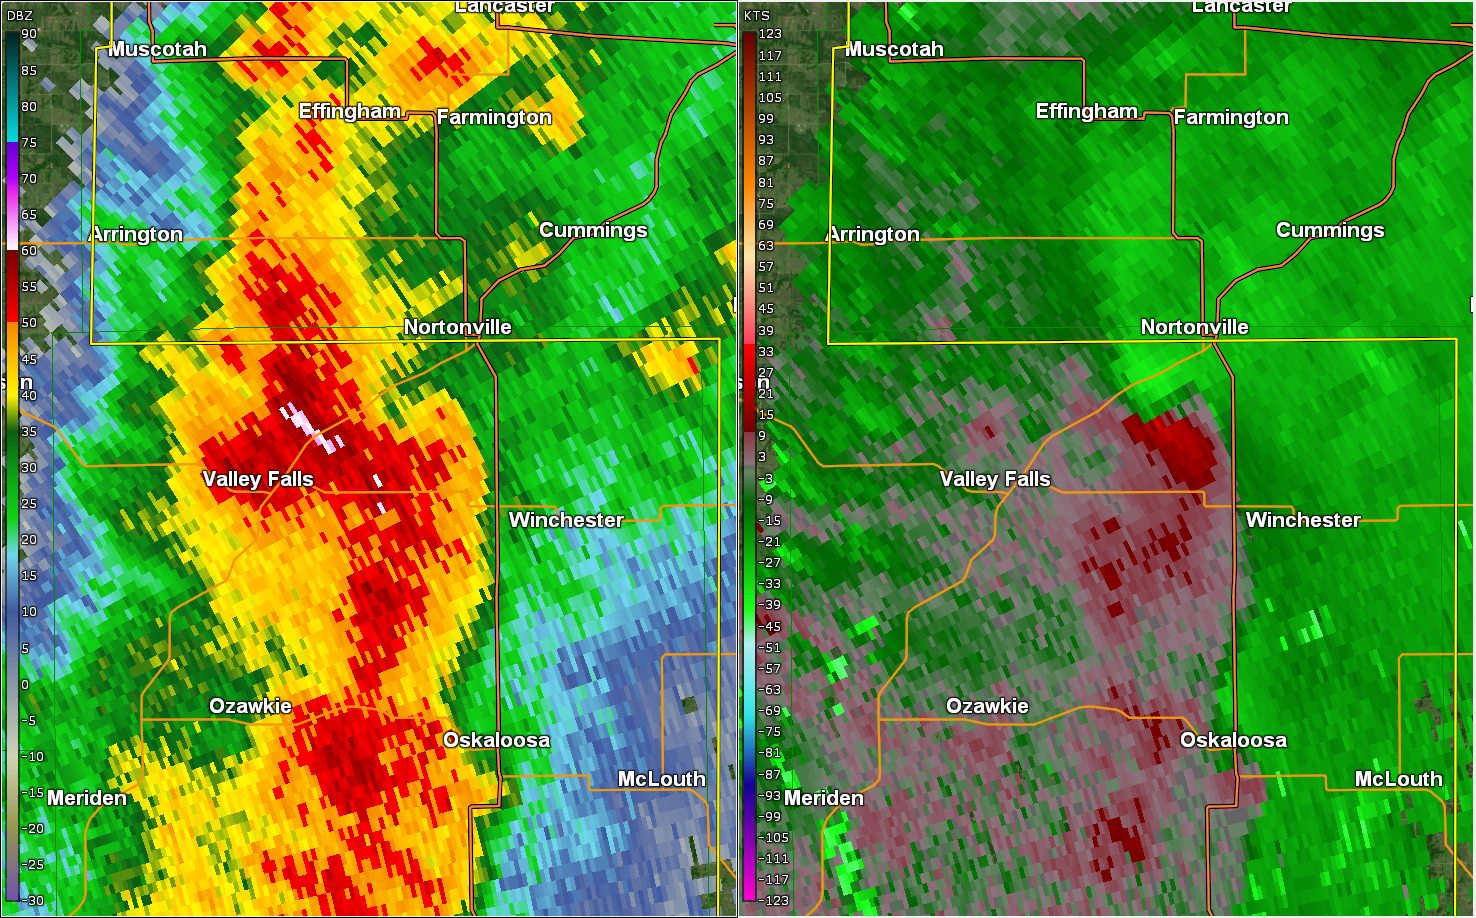 Radar reflectivity and storm-relative velocity from 8:04PM on March 29, 2022.